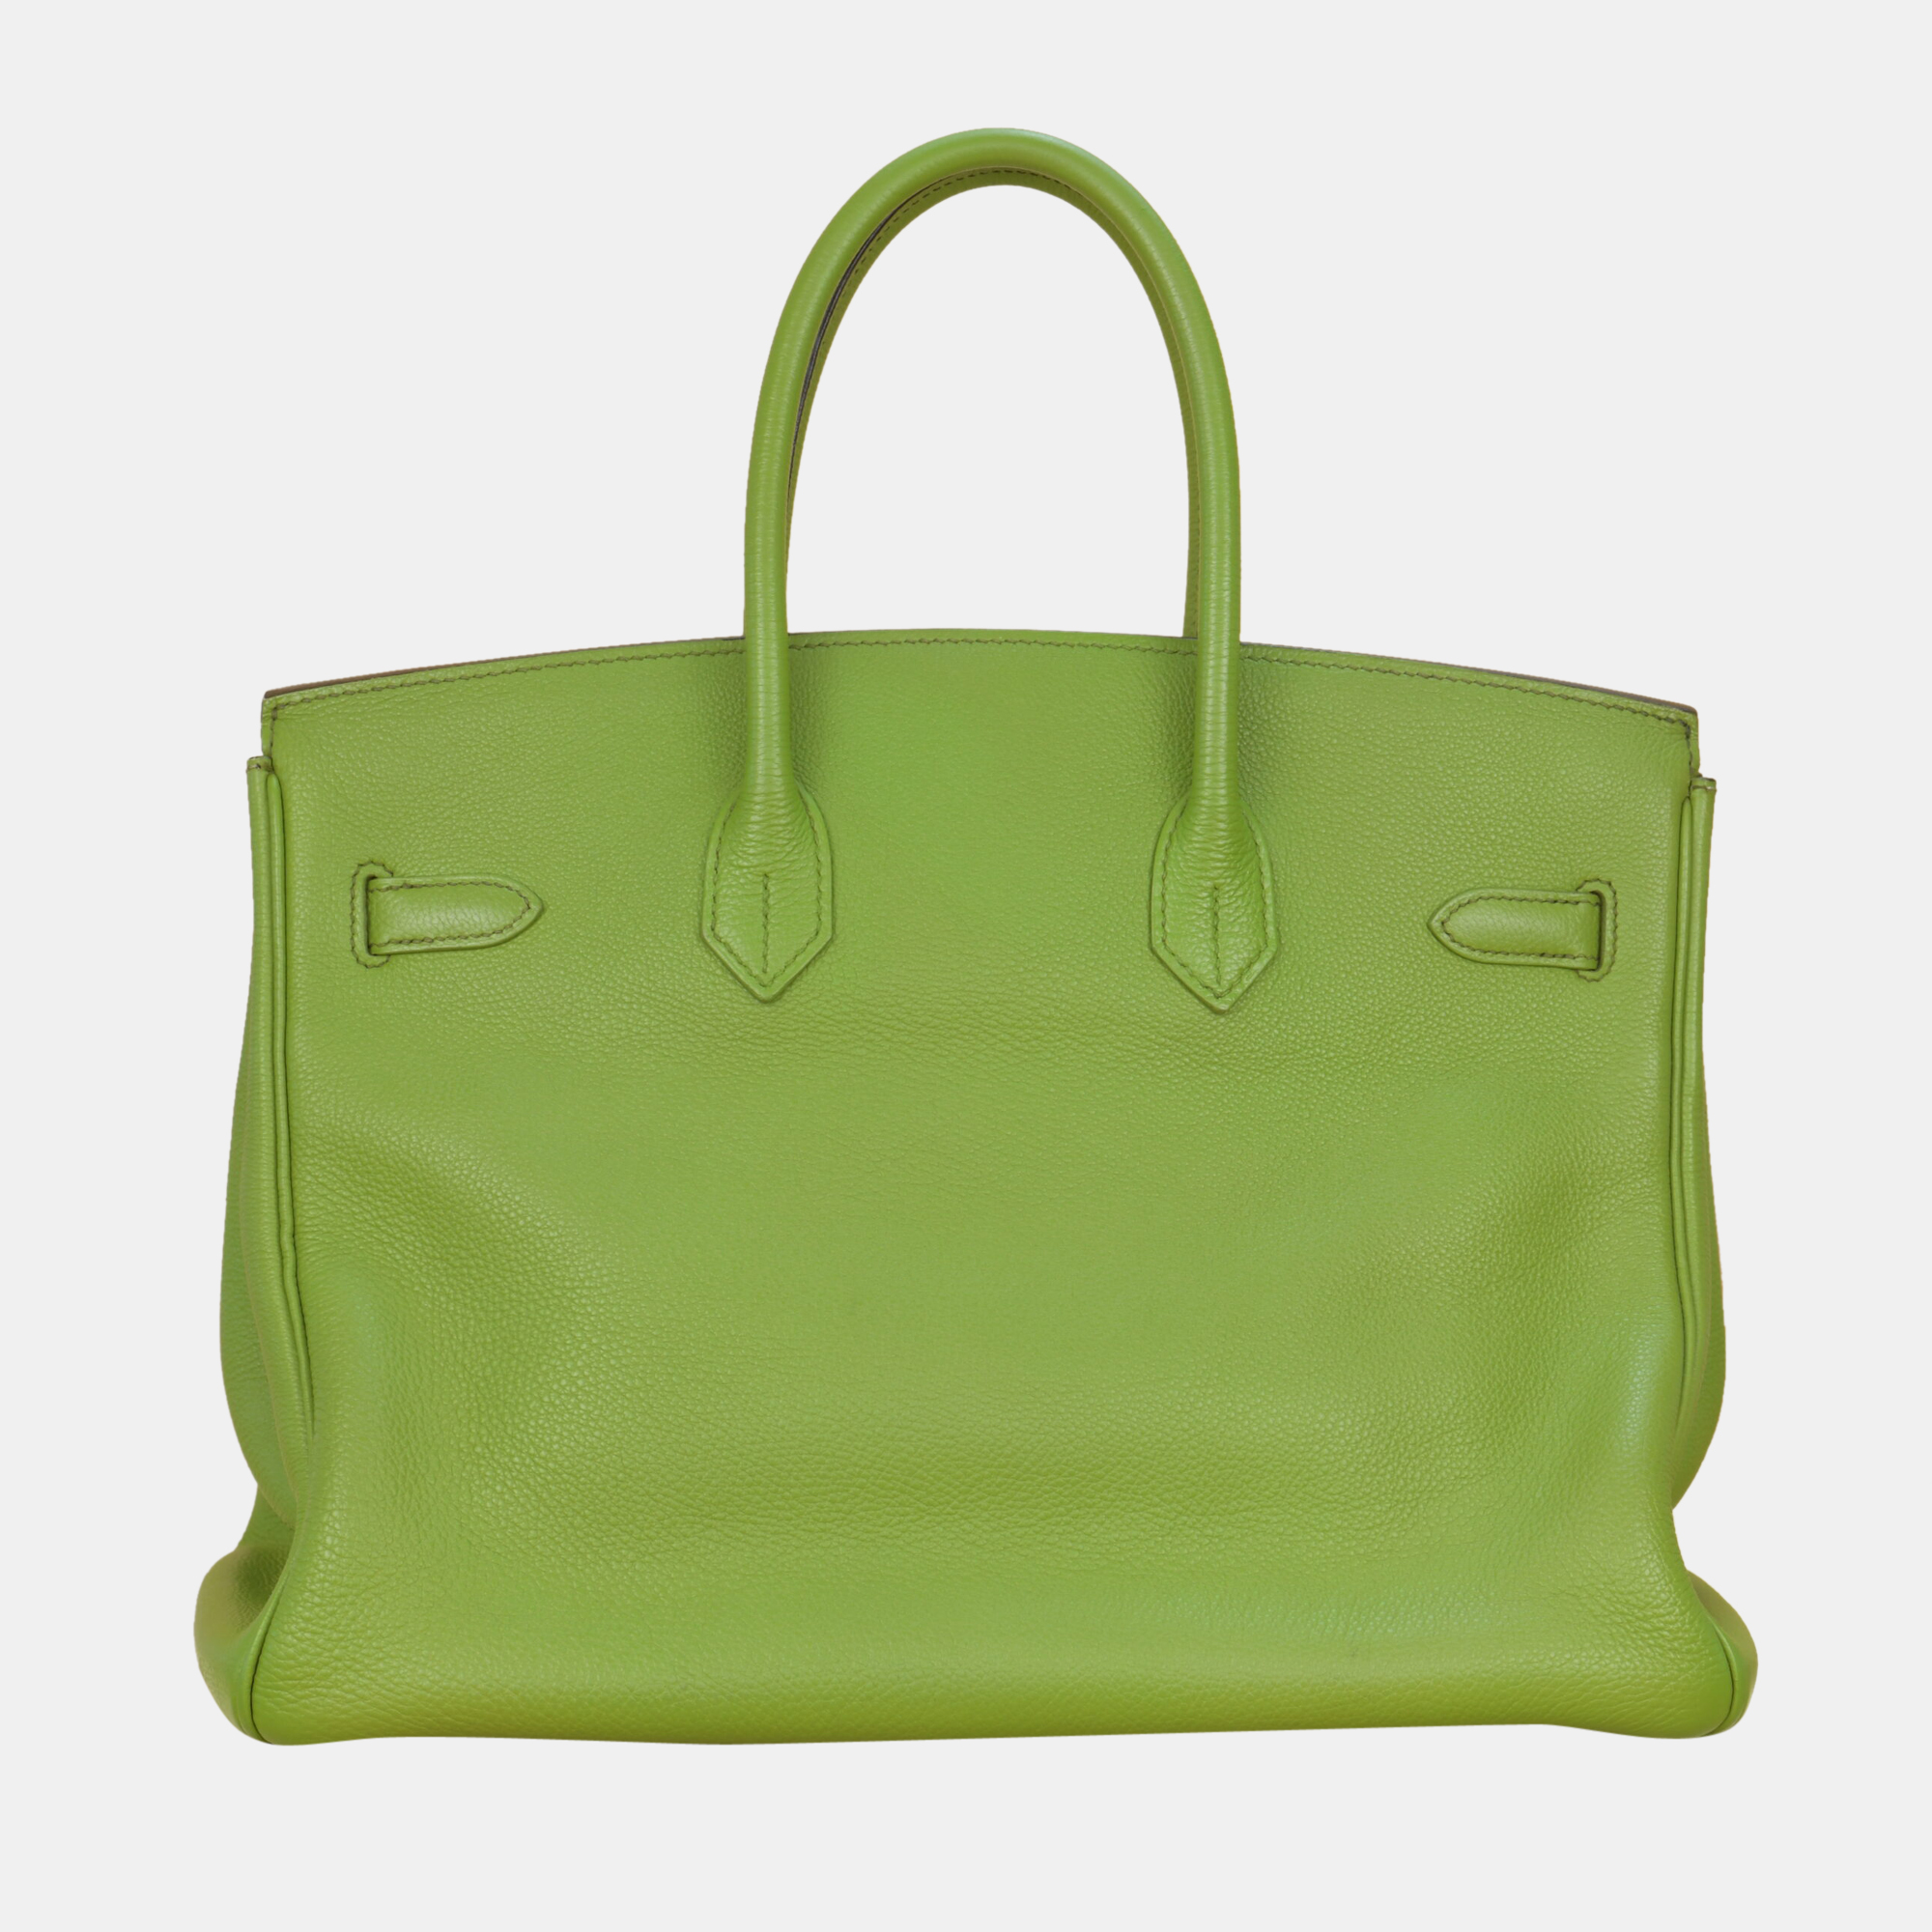 Hermes Anise Green Togo Leather Birkin 35cm With Silver Hardware